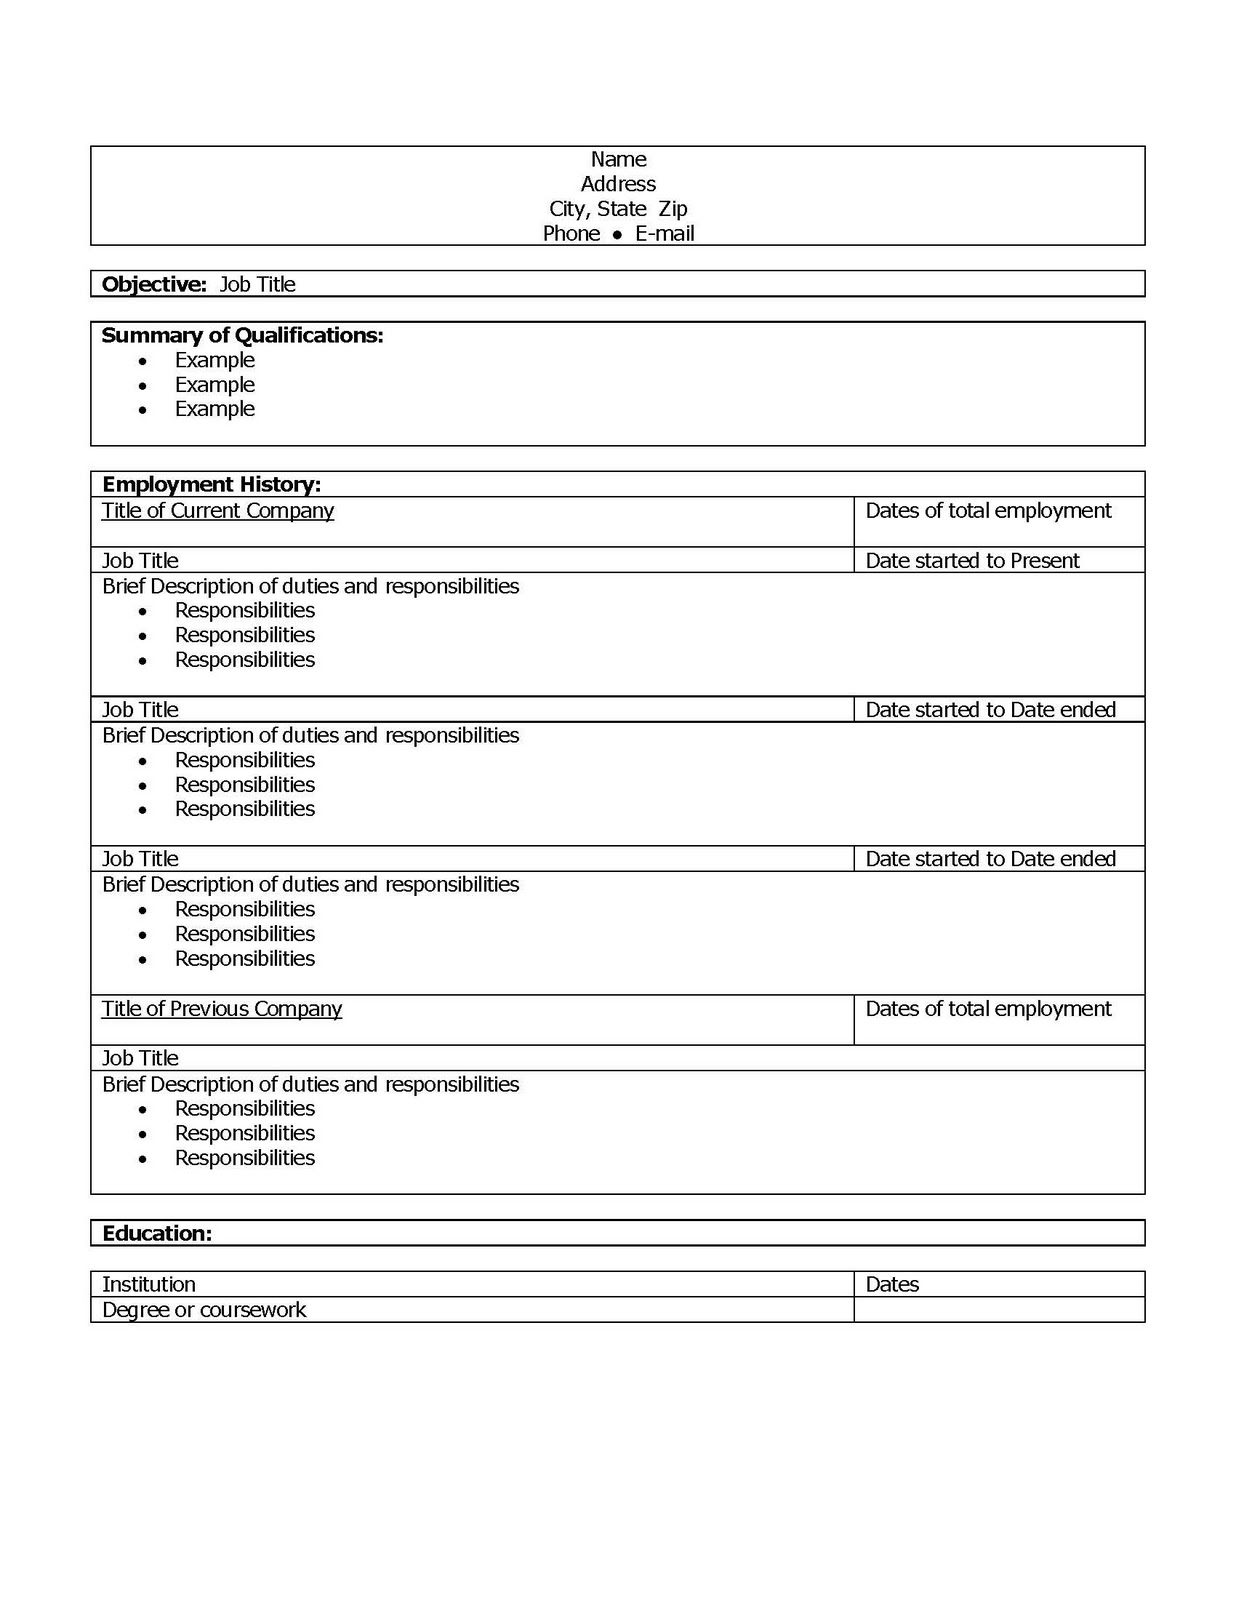 resume writing template cv writing services in ssays for cv writing